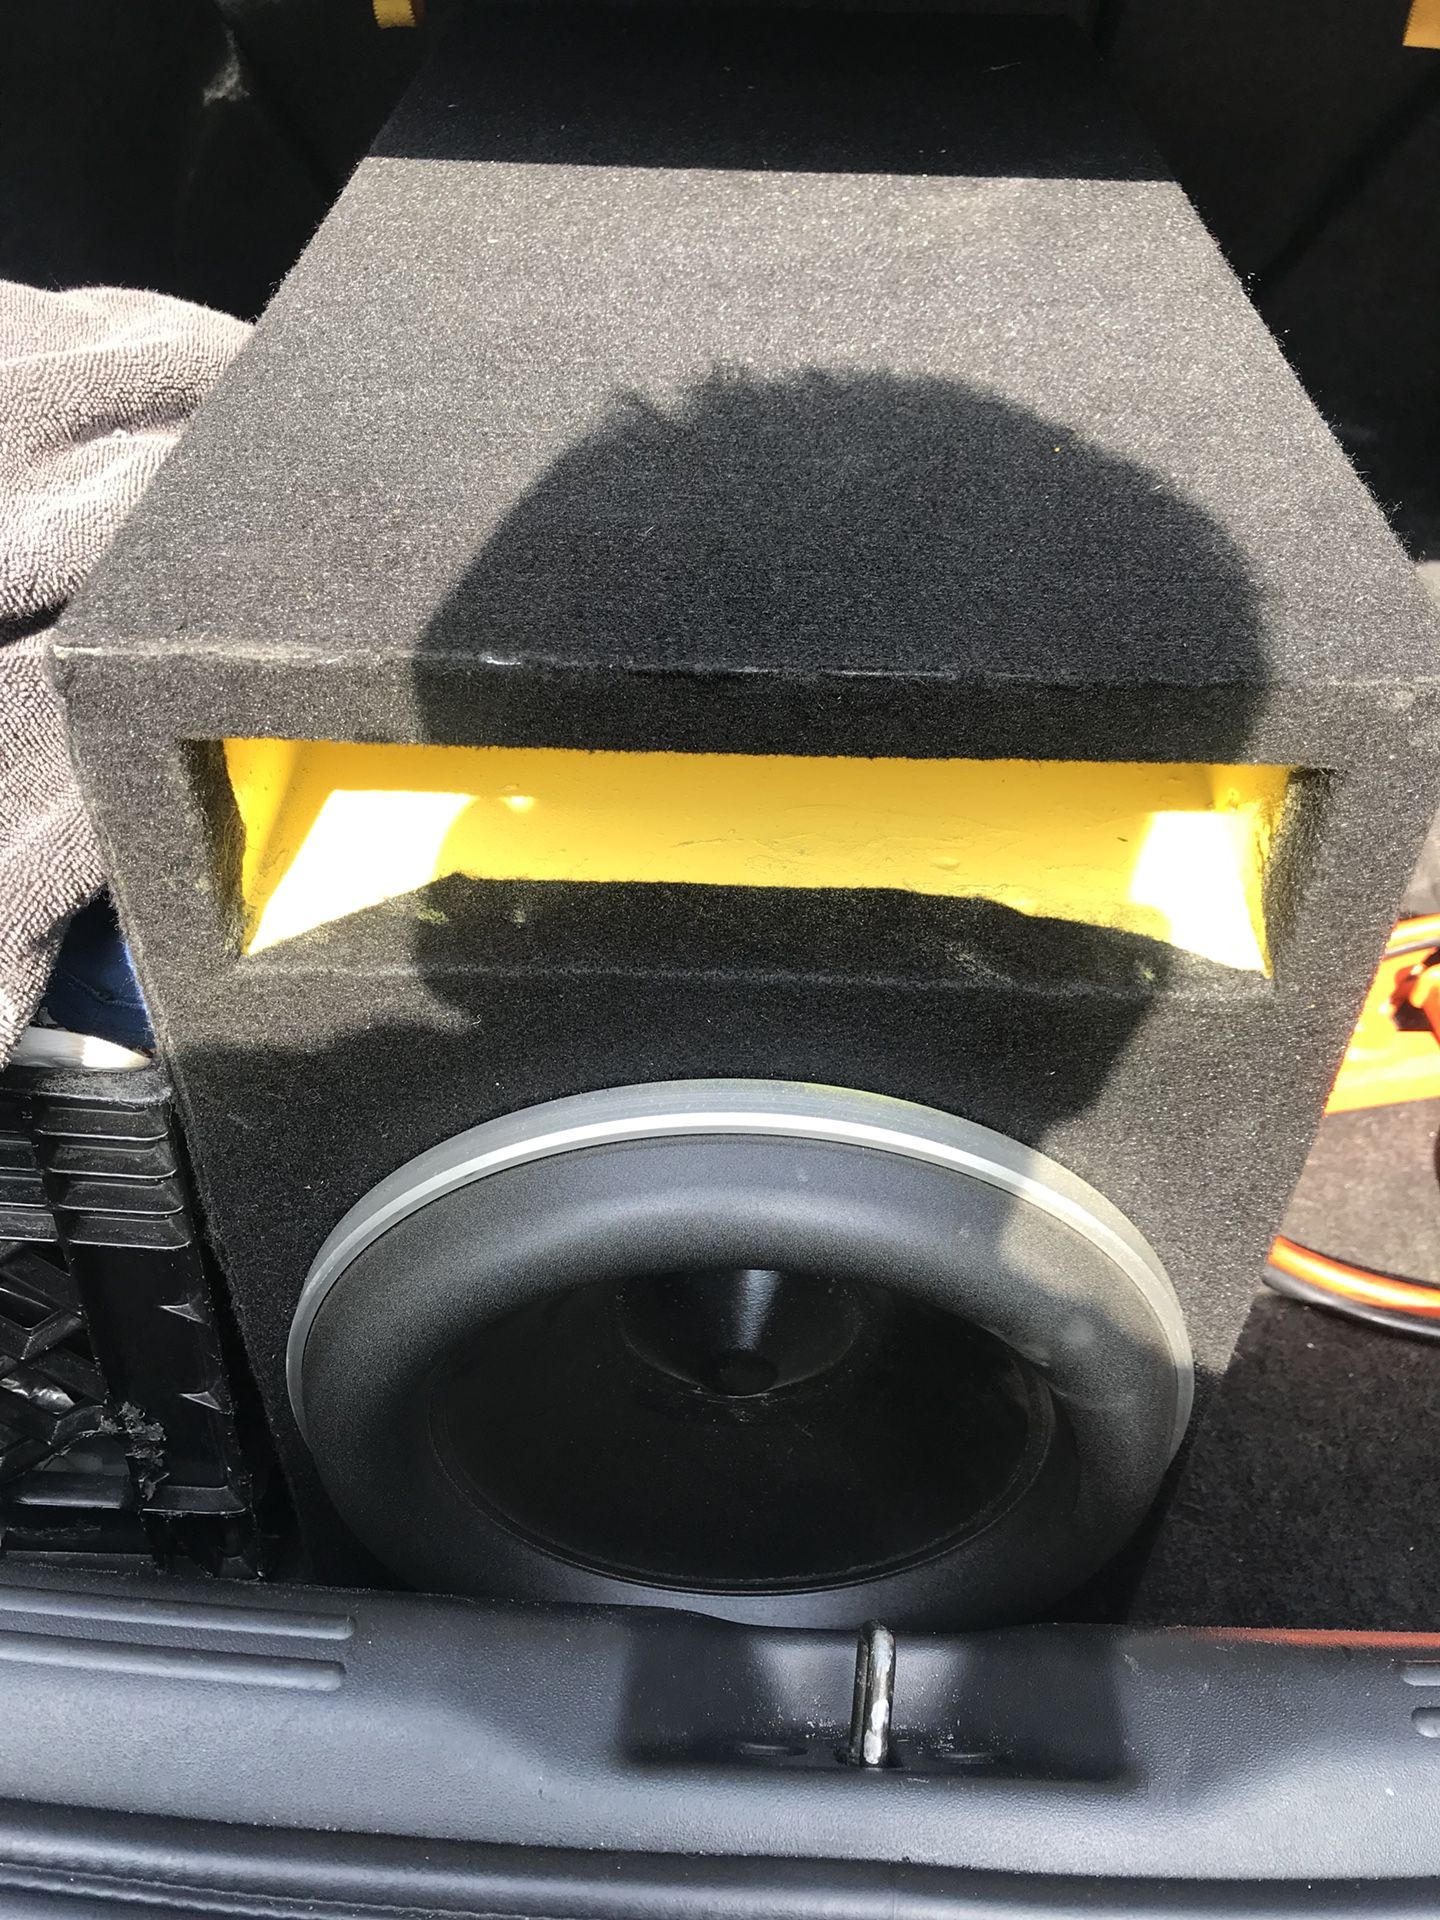 JL Audio Subwoofer and amplifier